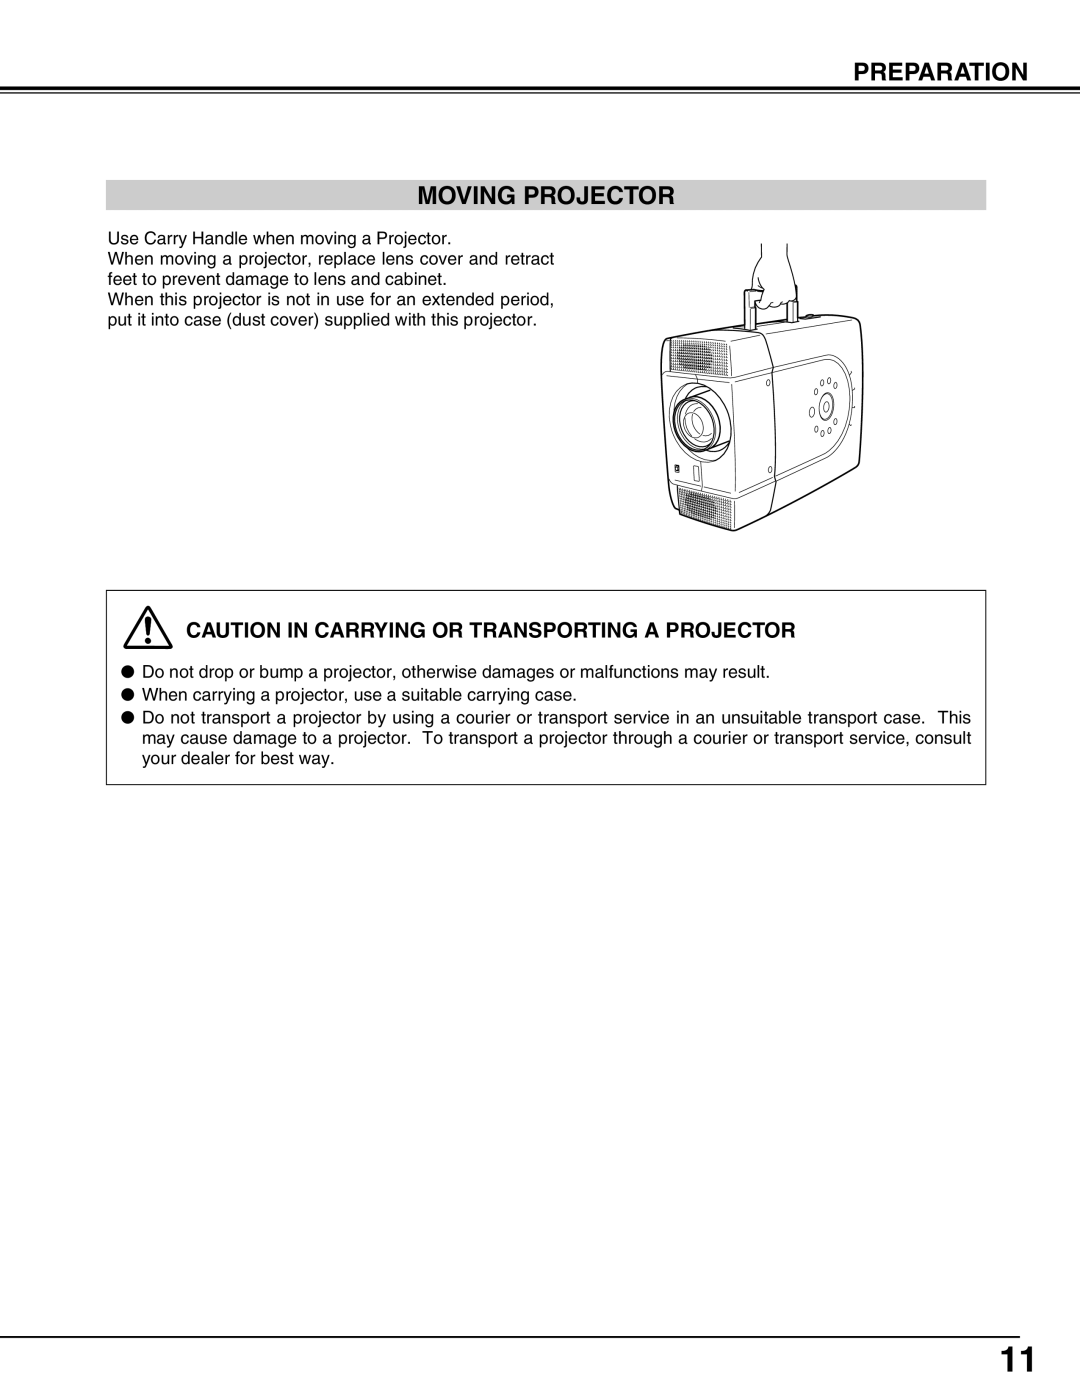 Eiki LC-X50 instruction manual Preparation Moving Projector, Caution In Carrying Or Transporting A Projector 